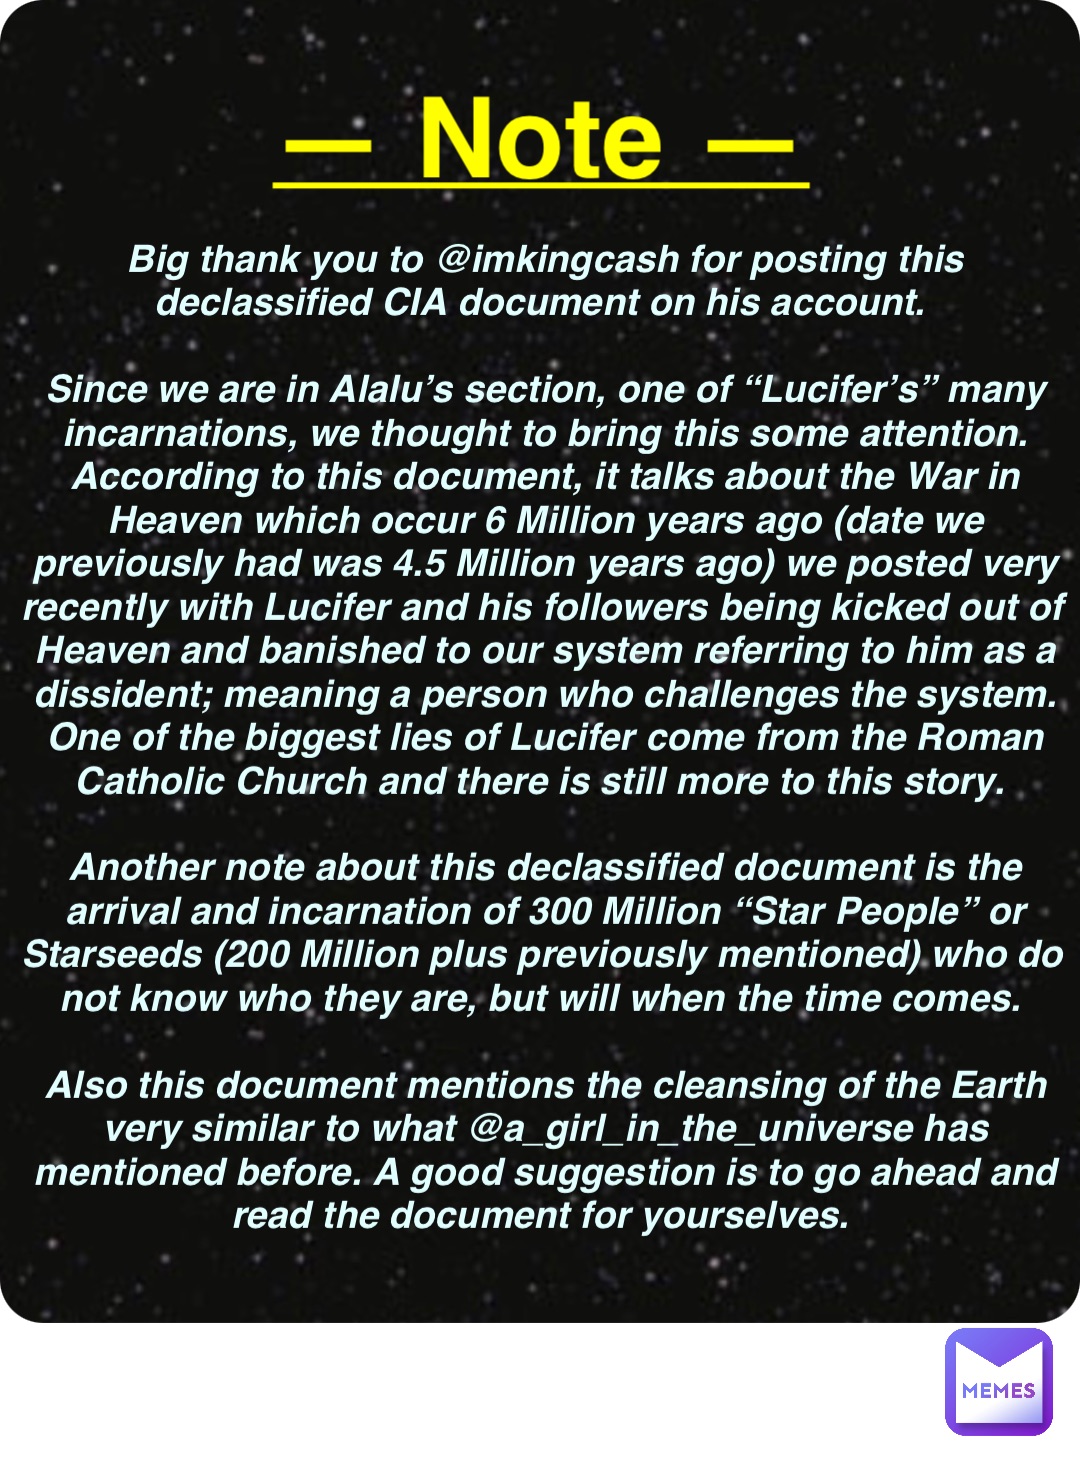 Double tap to edit Big thank you to @imkingcash for posting this declassified CIA document on his account.

Since we are in Alalu’s section, one of “Lucifer’s” many incarnations, we thought to bring this some attention. According to this document, it talks about the War in Heaven which occur 6 Million years ago (date we previously had was 4.5 Million years ago) we posted very recently with Lucifer and his followers being kicked out of Heaven and banished to our system referring to him as a dissident; meaning a person who challenges the system. One of the biggest lies of Lucifer come from the Roman Catholic Church and there is still more to this story.

Another note about this declassified document is the arrival and incarnation of 300 Million “Star People” or Starseeds (200 Million plus previously mentioned) who do not know who they are, but will when the time comes.

Also this document mentions the cleansing of the Earth very similar to what @a_girl_in_the_universe has mentioned before. A good suggestion is to go ahead and read the document for yourselves. — Note —